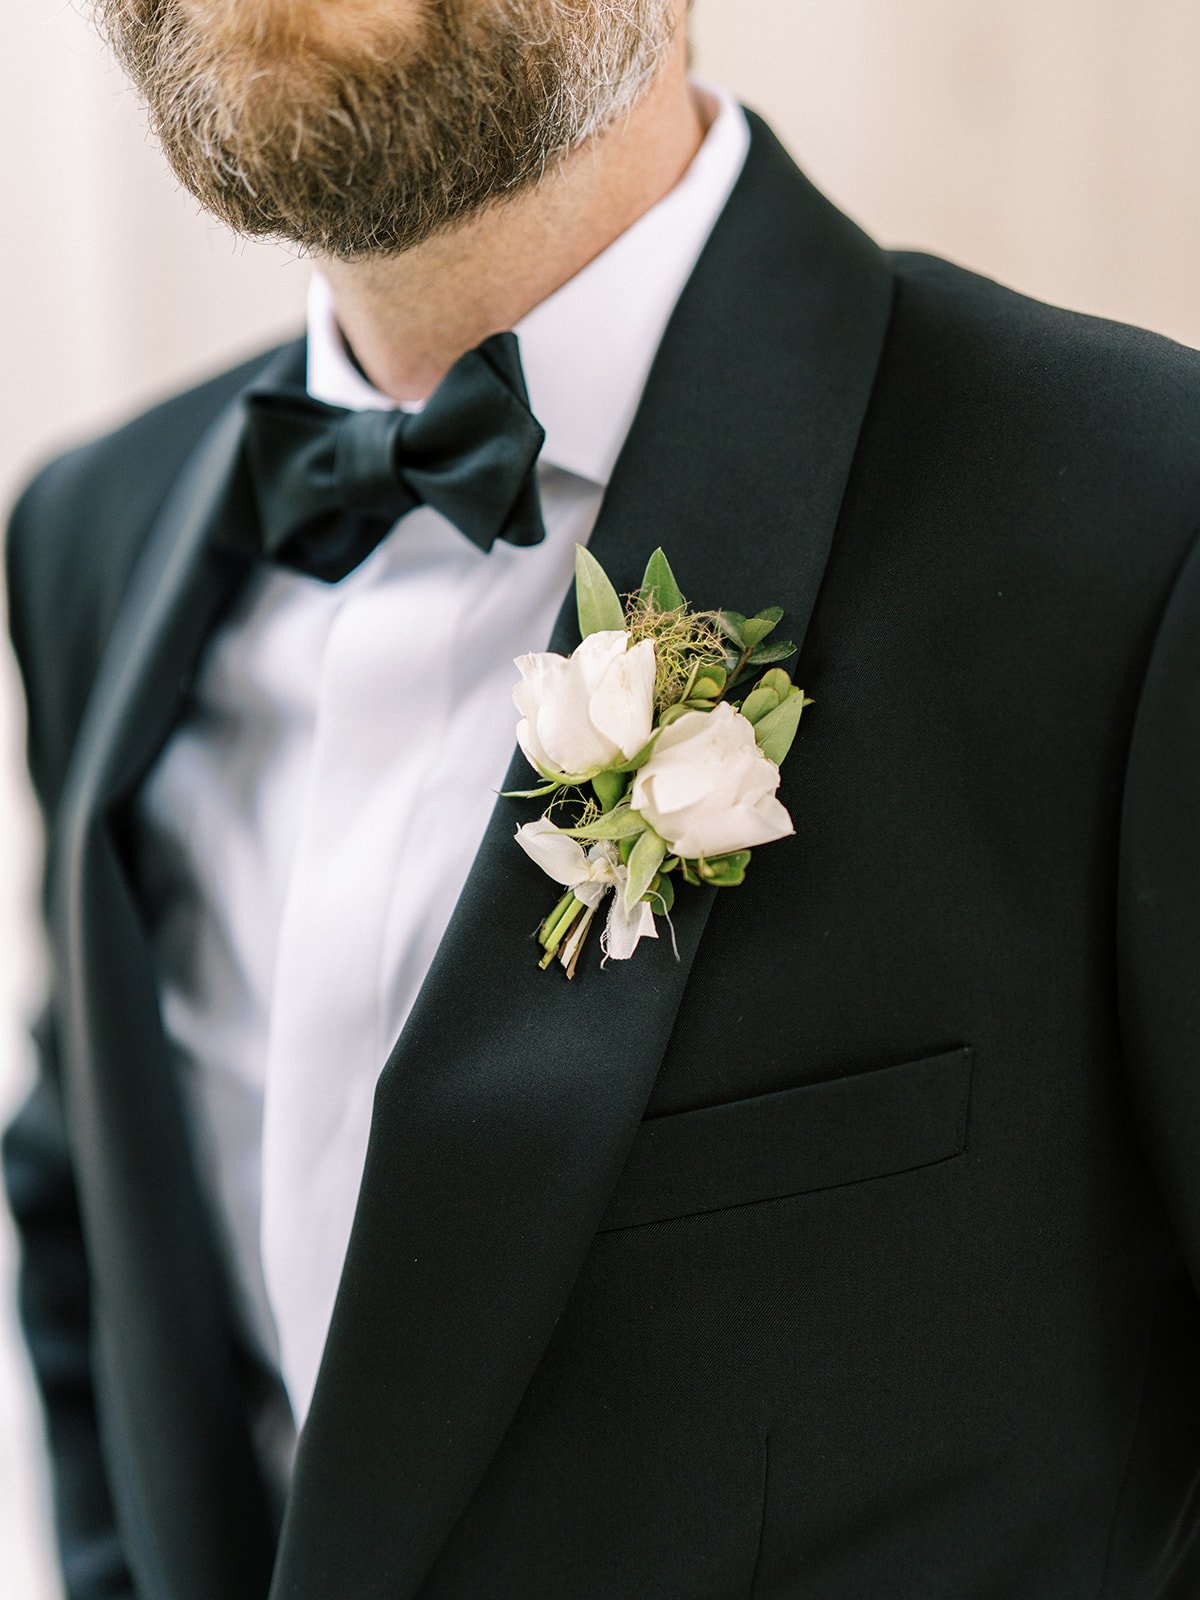 Elegant boutonniere with spray roses, greenery and delicate textures. Designed by Rosemary and Finch in Nashville, TN.